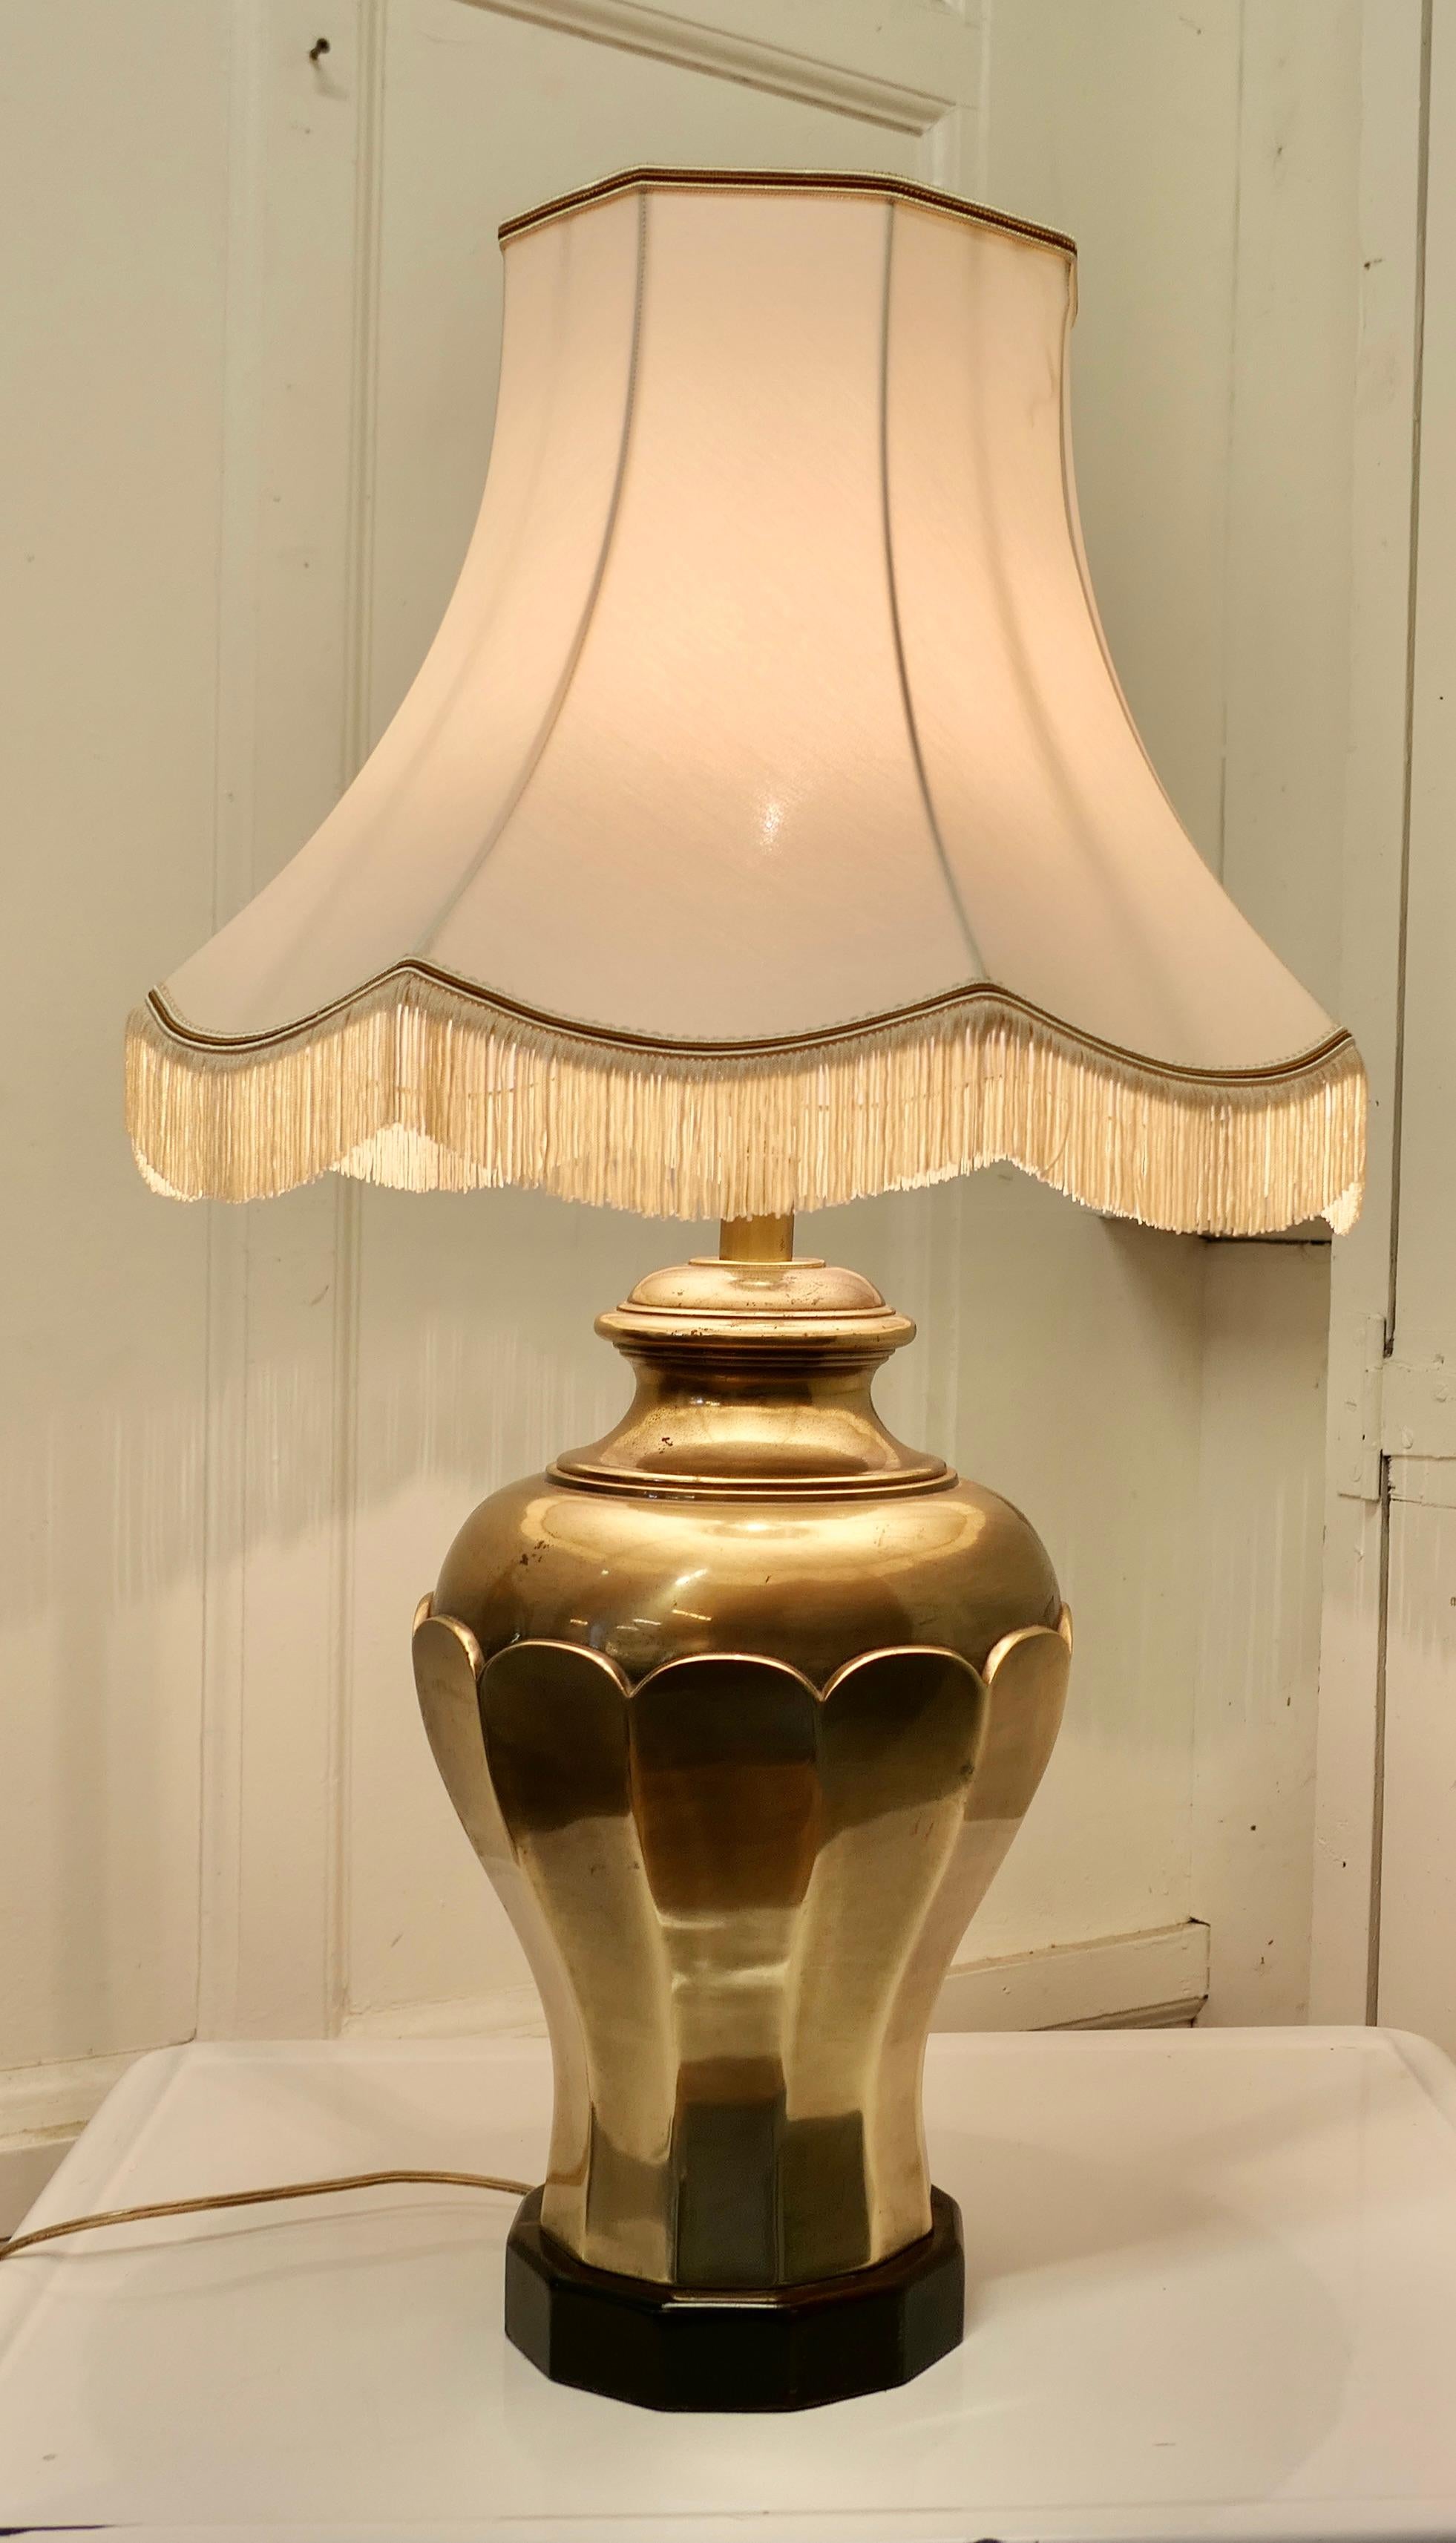 Large Bulbous brass table lamp 

This is an unusual Lamp has a large brass base set on a wooden plinth and has scalloped fringed lampshade
The lamp is fully wired and in good condition, a statement piece in any room
The lamp is 29” tall, 10”